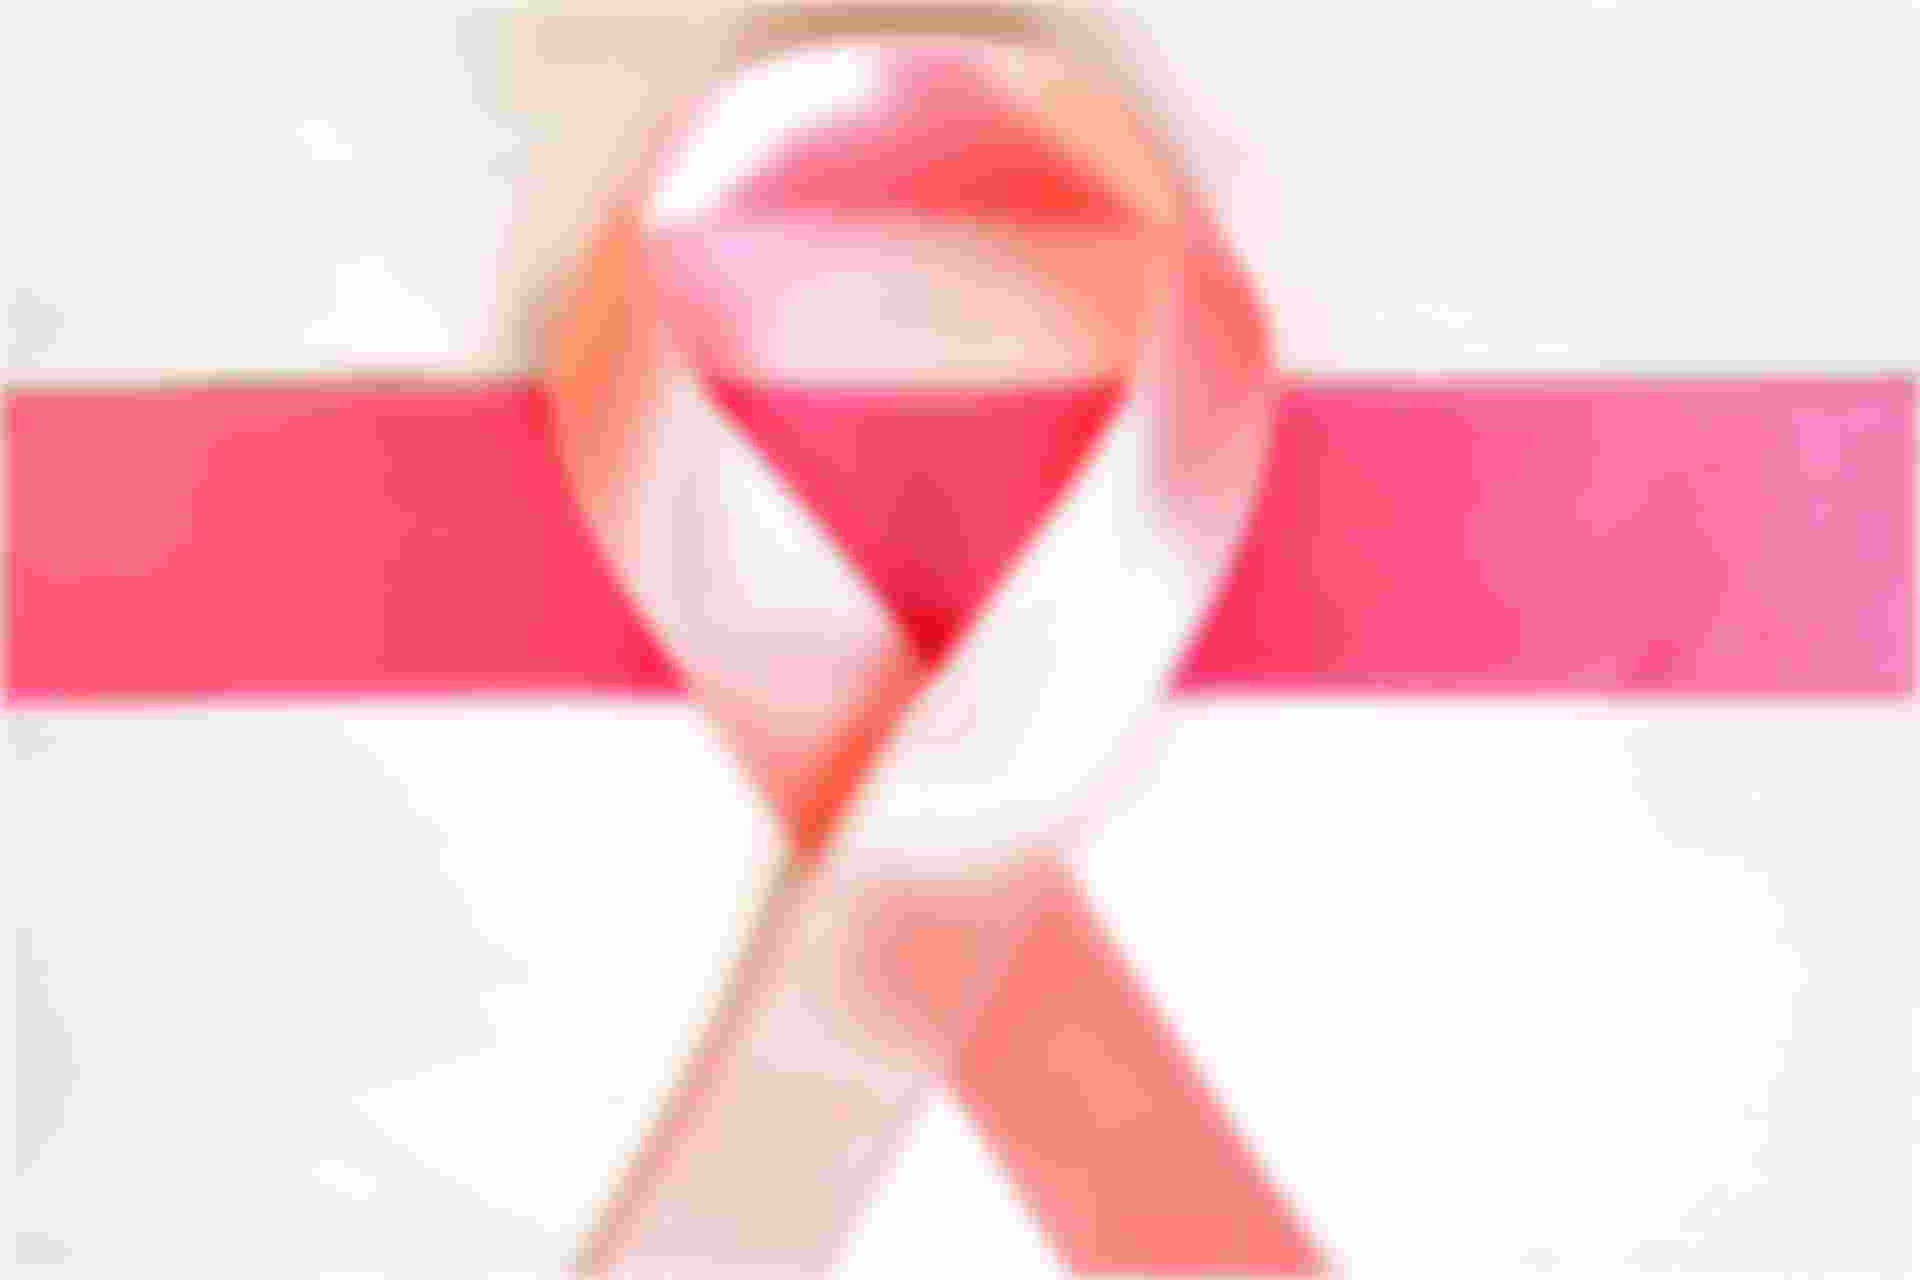 Breast Cancer Support Group